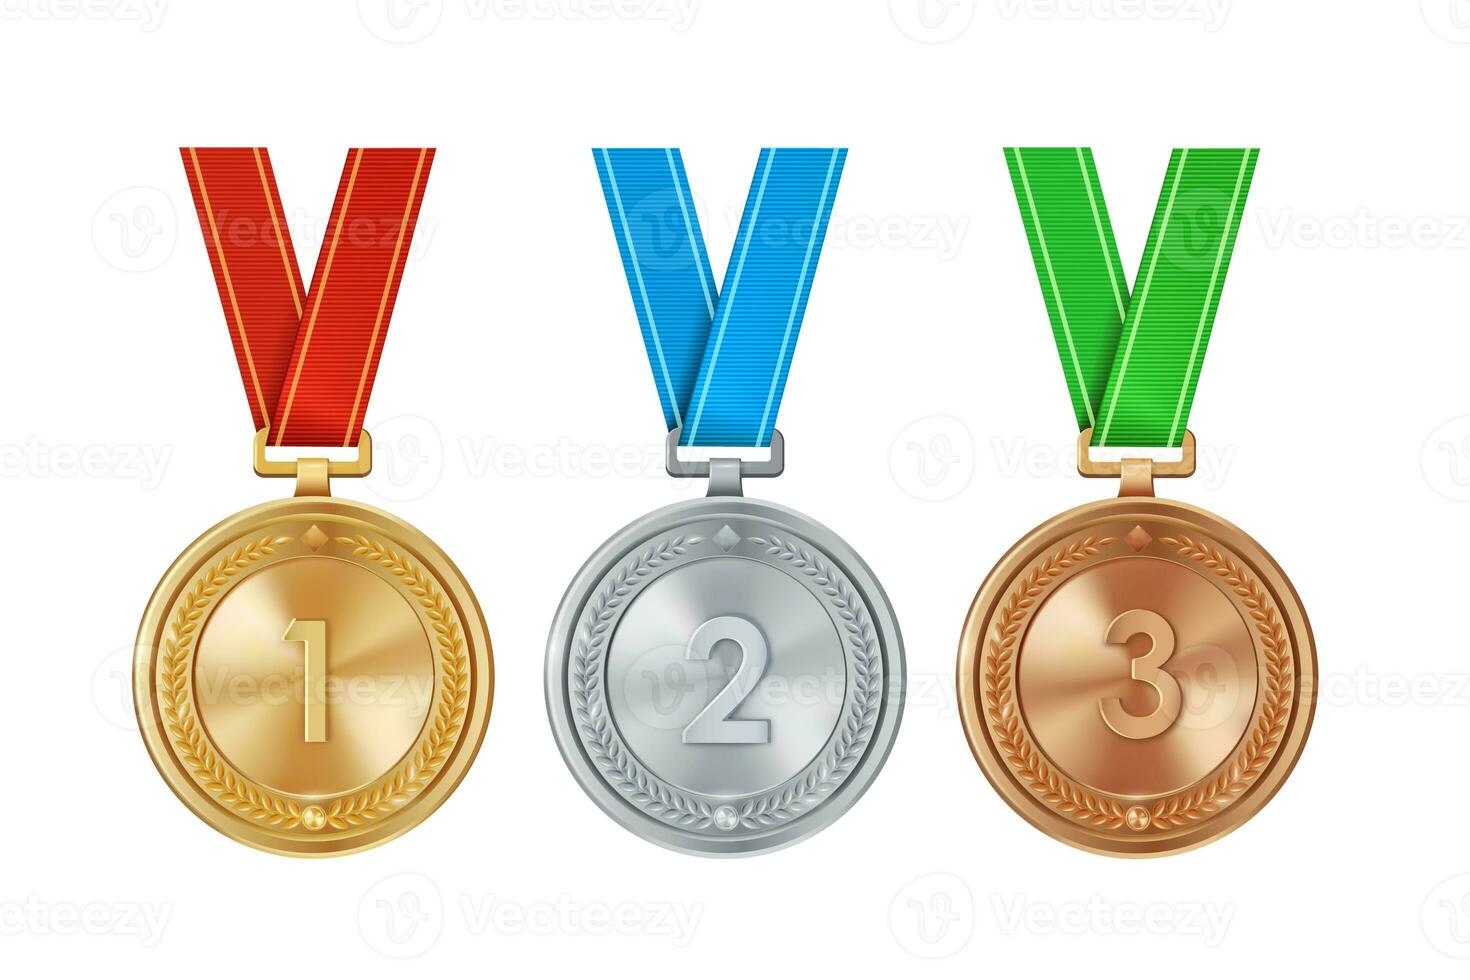 Realistic set of golden, silver, and bronze medals on colorful ribbons. Sports competition awards for 1st, 2nd, and 3rd place. Championship rewards for achievements and victories. photo